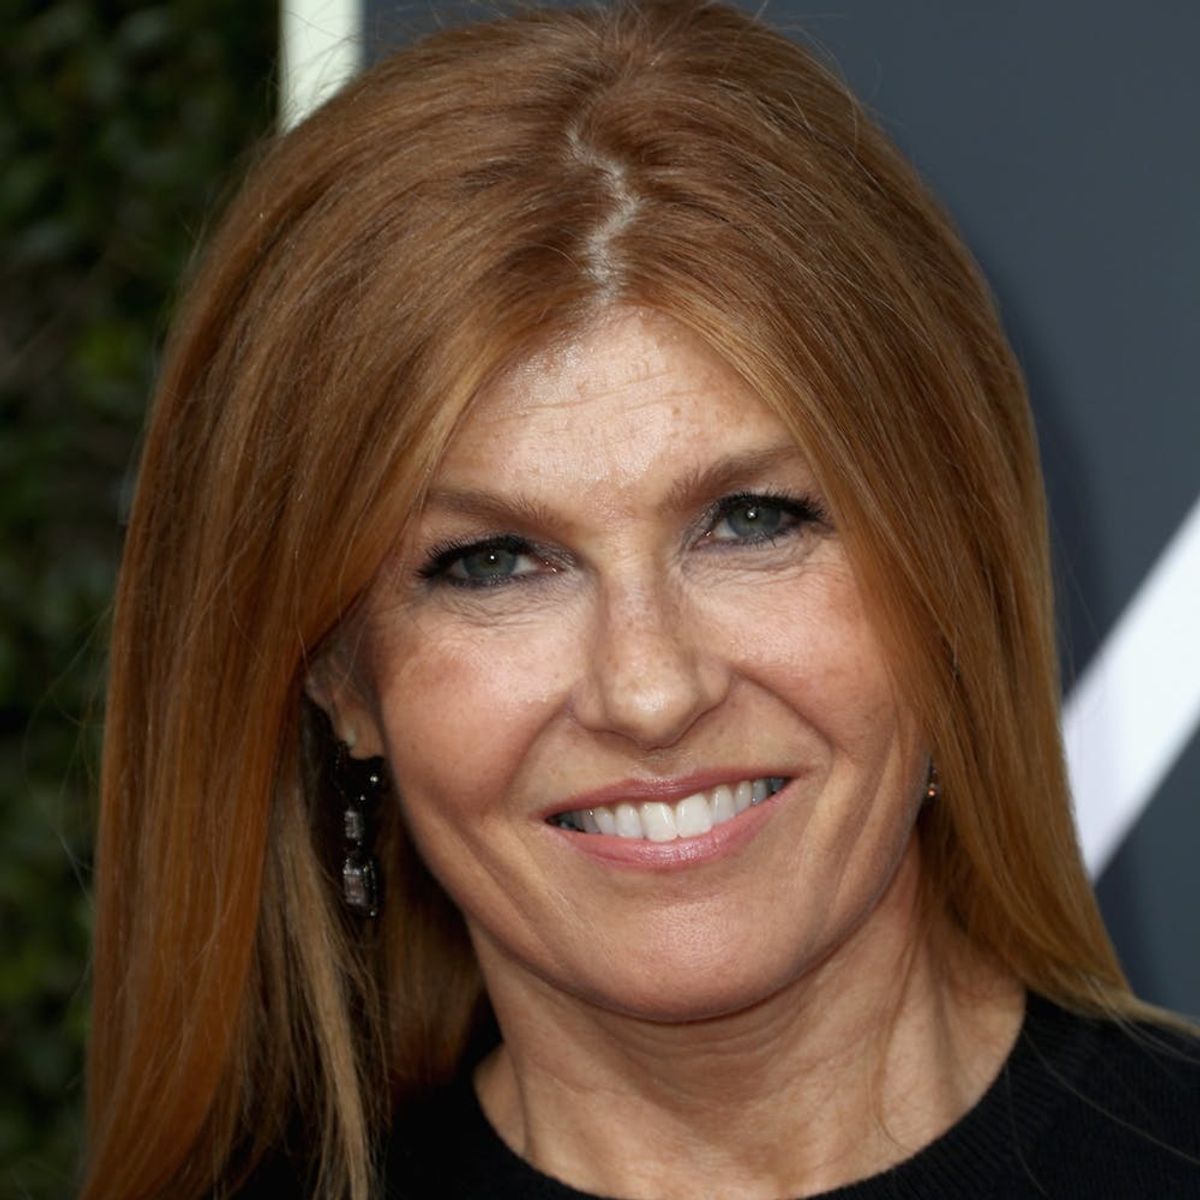 Connie Britton Ditched a Golden Globes Gown in Favor of This Sweater With a Cause